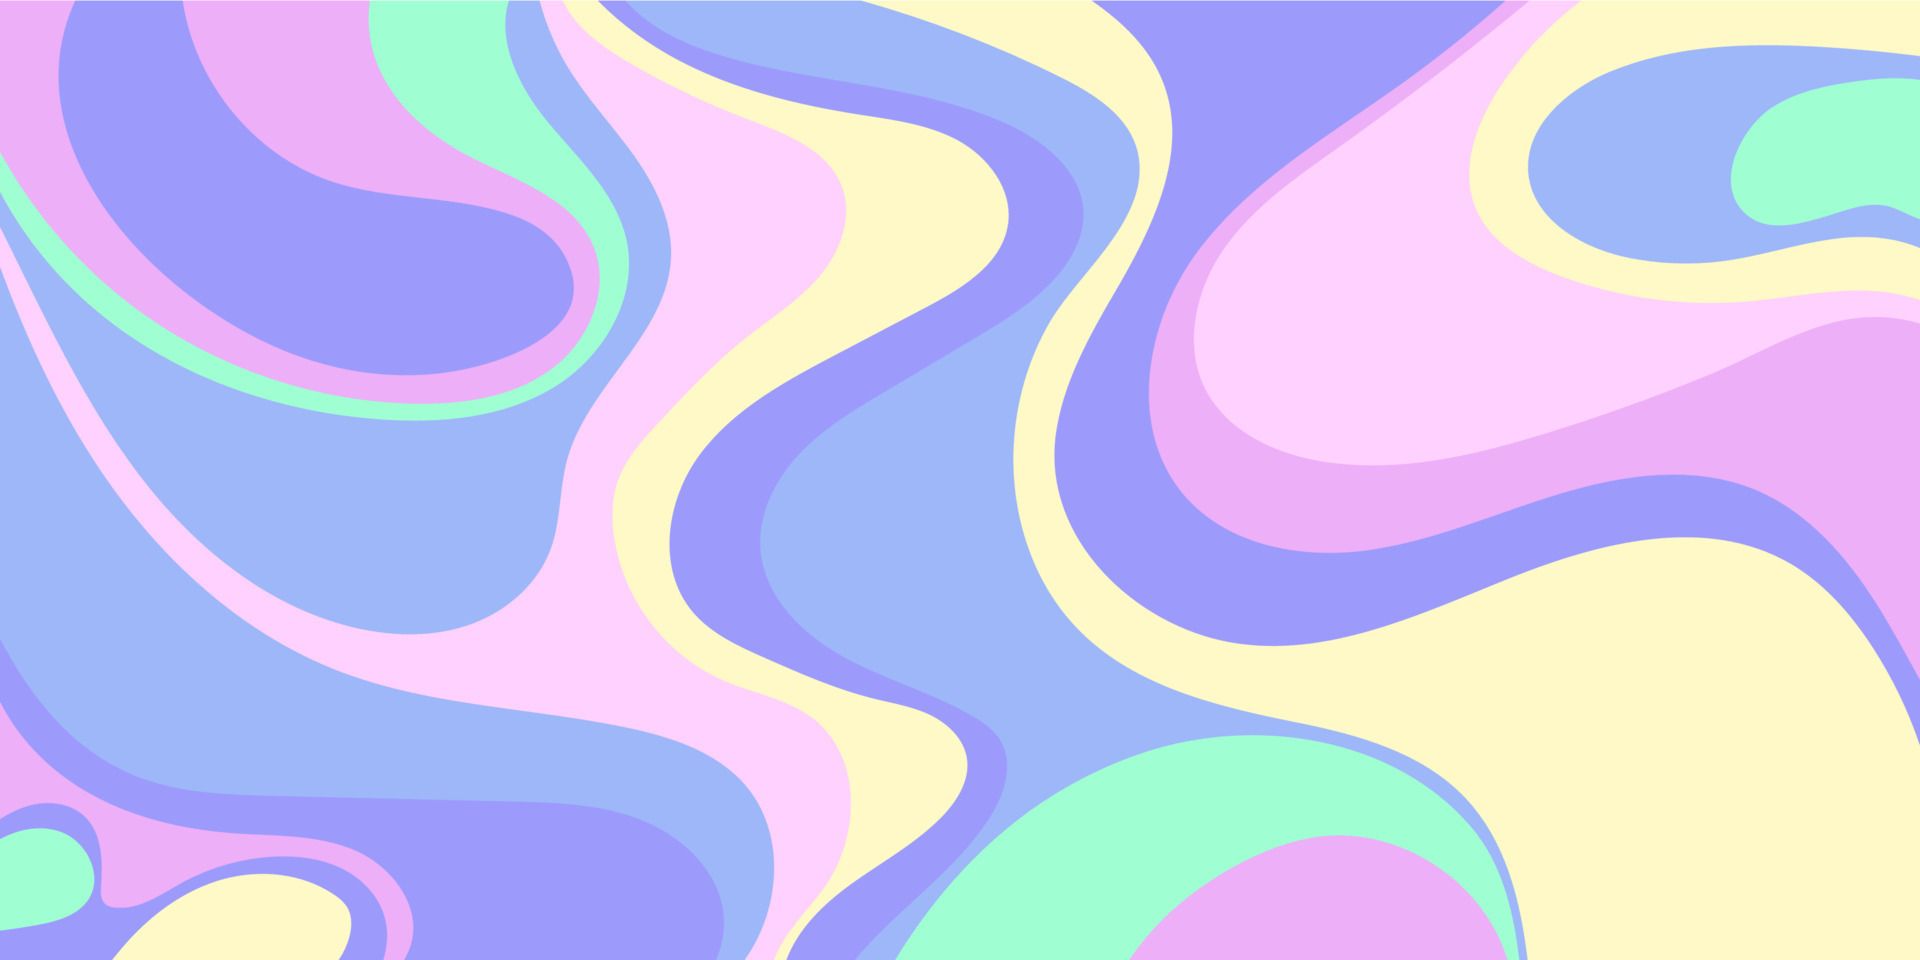 A colorful abstract background with flowing liquid shapes - 2000s